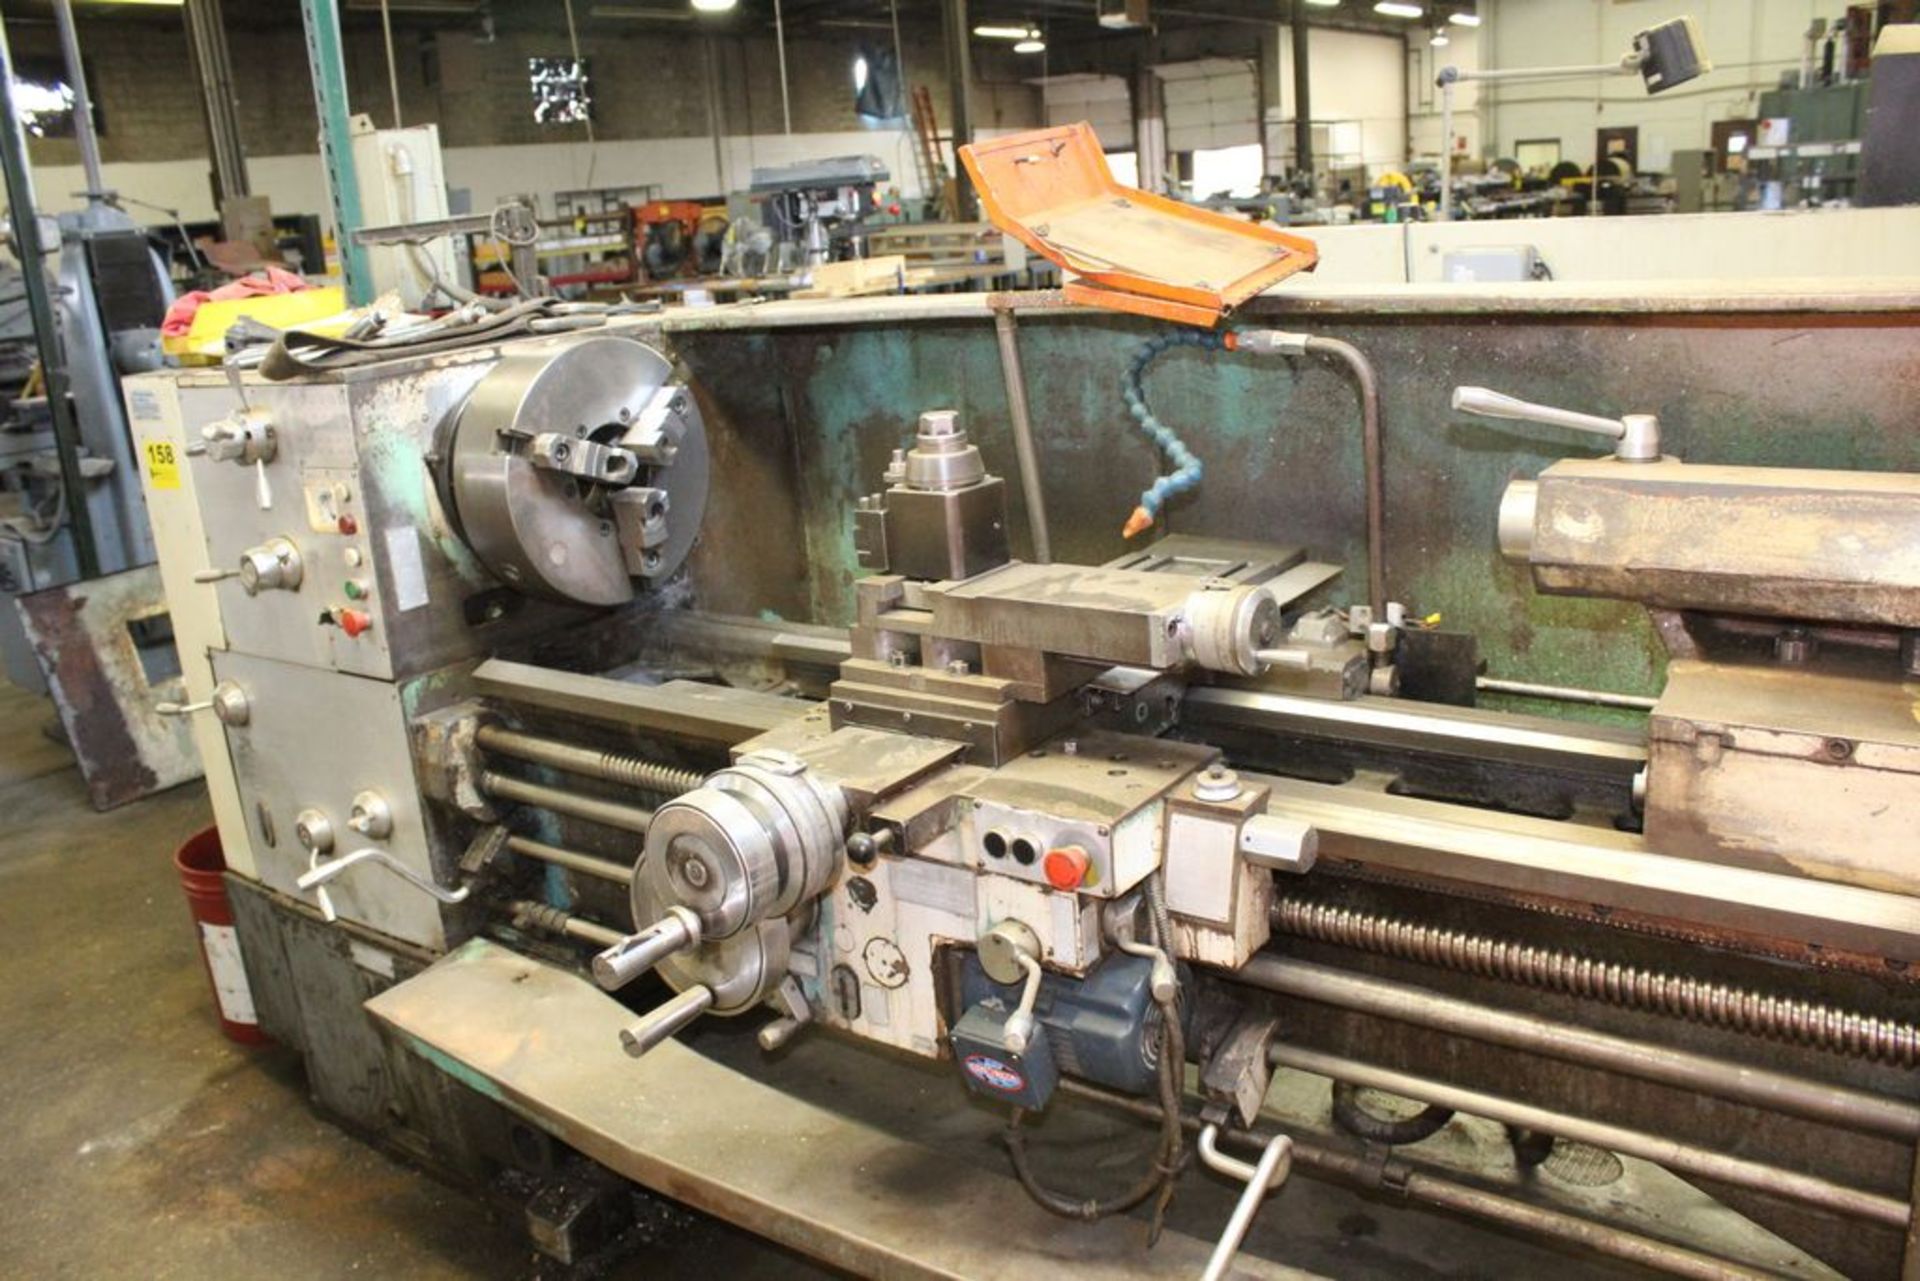 PROMASTER 2160 GAP BED LATHE, 21" SWING WITH 60" BETWEEN CENTERS, 12" GAP, 1,800 RPM, 4" HIS, WITH